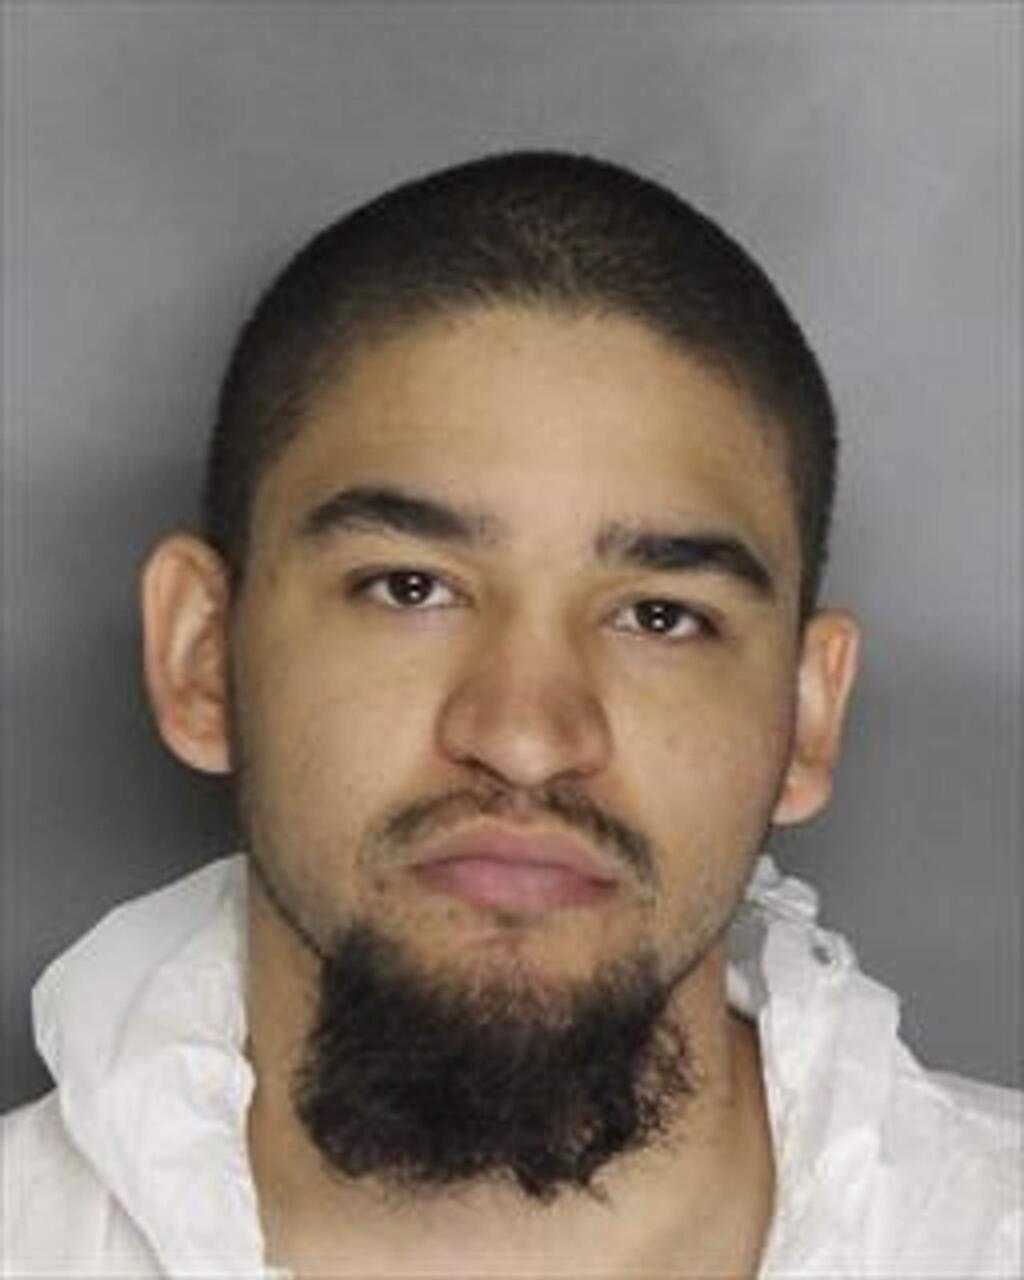 This photo provided May 16, 2018, by the Sacramento Police Department shows Tyler Anderson, 23, of Reno, Nev. Anderson, a suspect in the death of his 5-year-old daughter, waived extradition in Sacramento Superior Court on Monday, May 21, on a charge of suspicion of manslaughter. (Sacramento Police Department via AP)